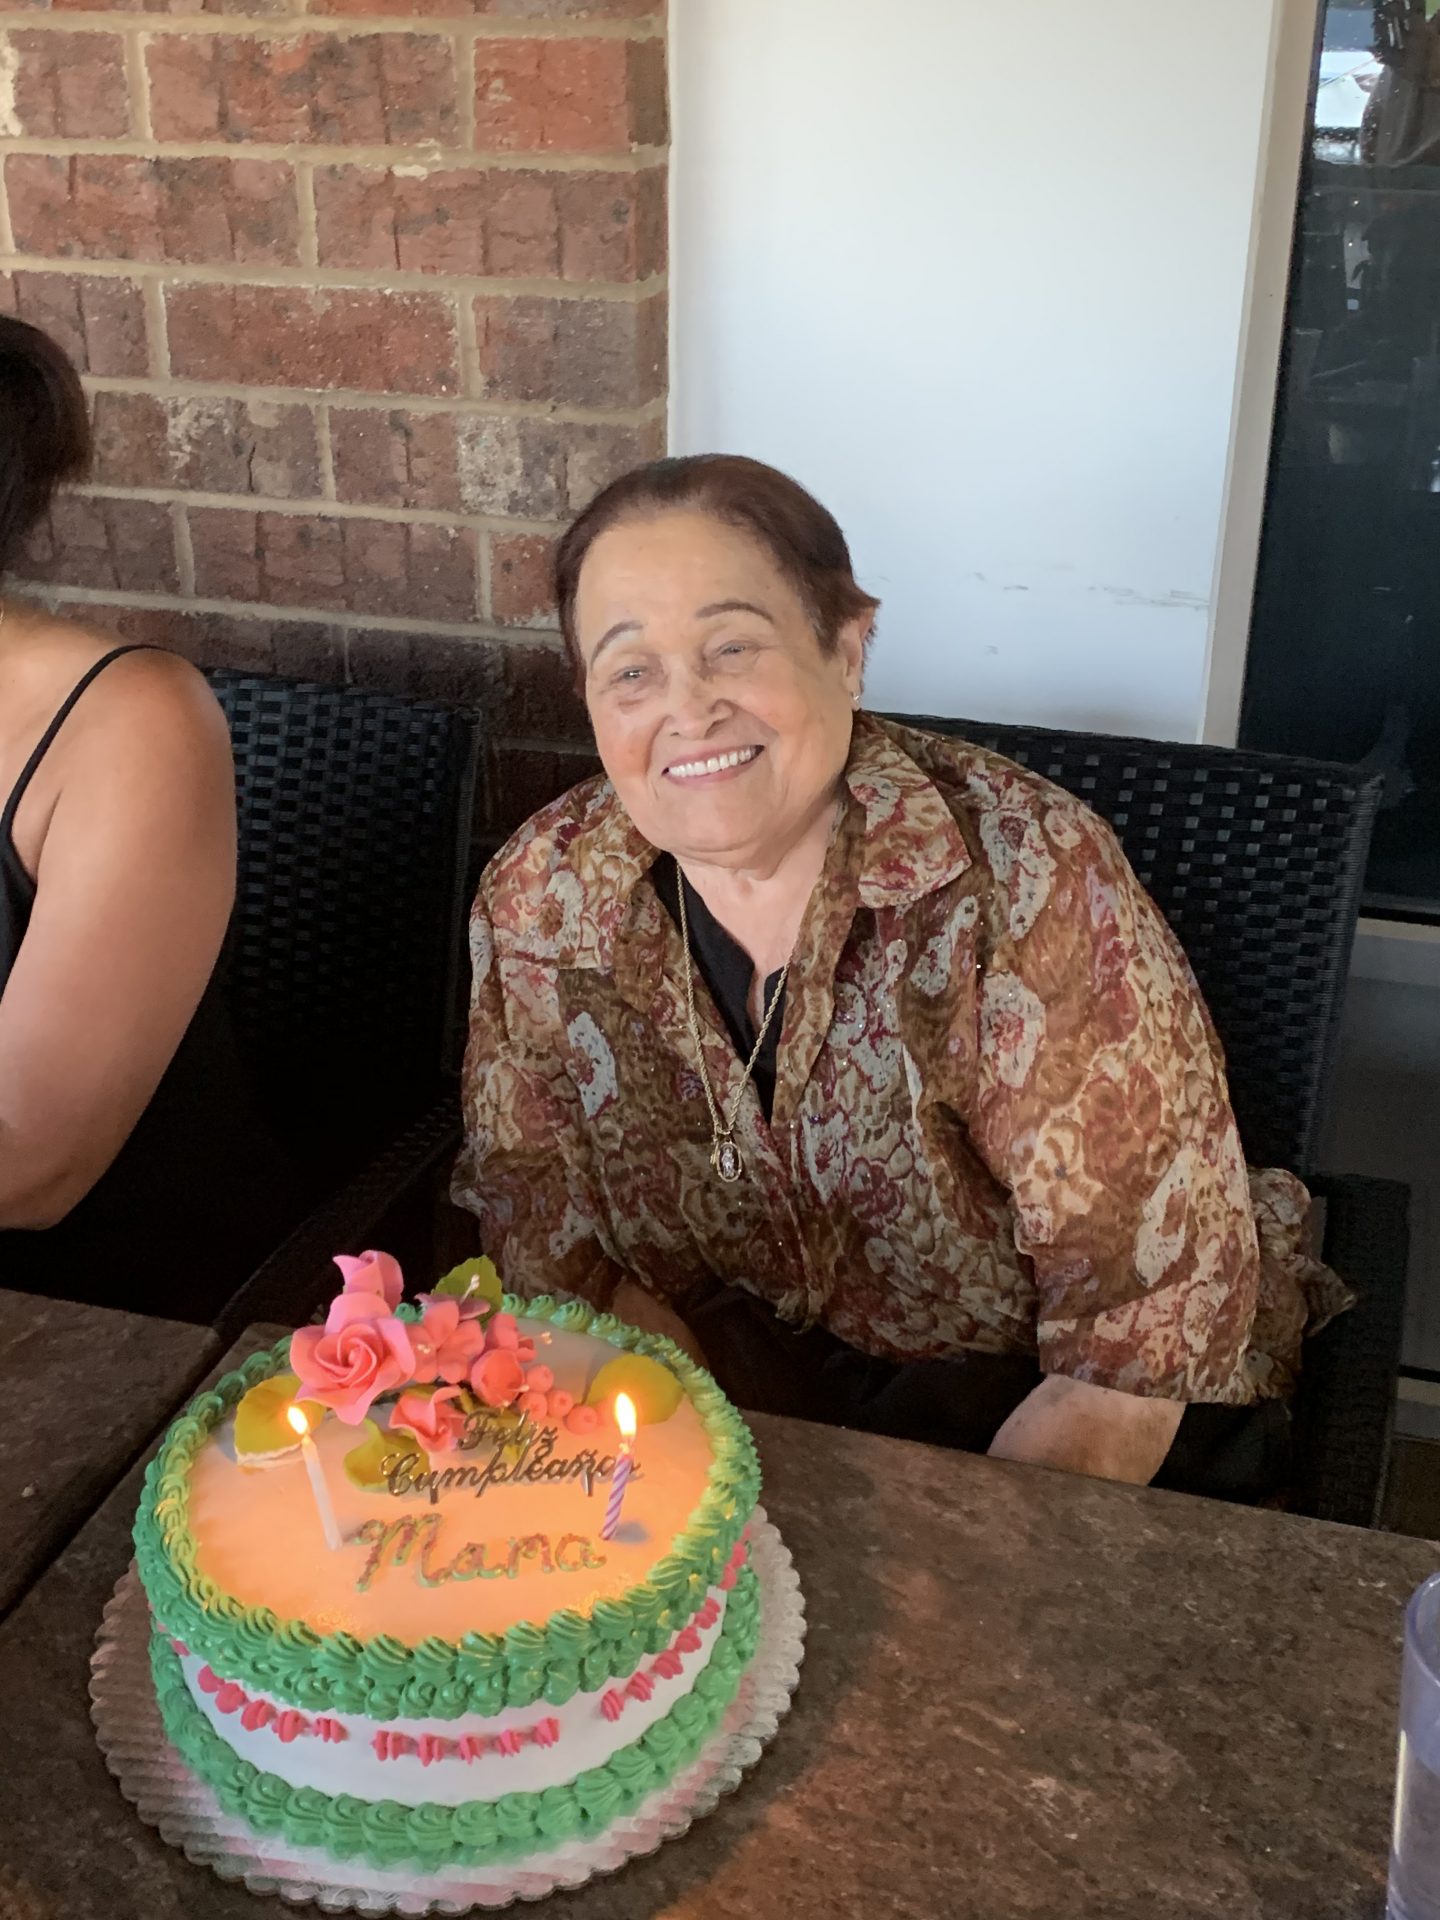 Her last birthday celebration in April. 83 and glowing!